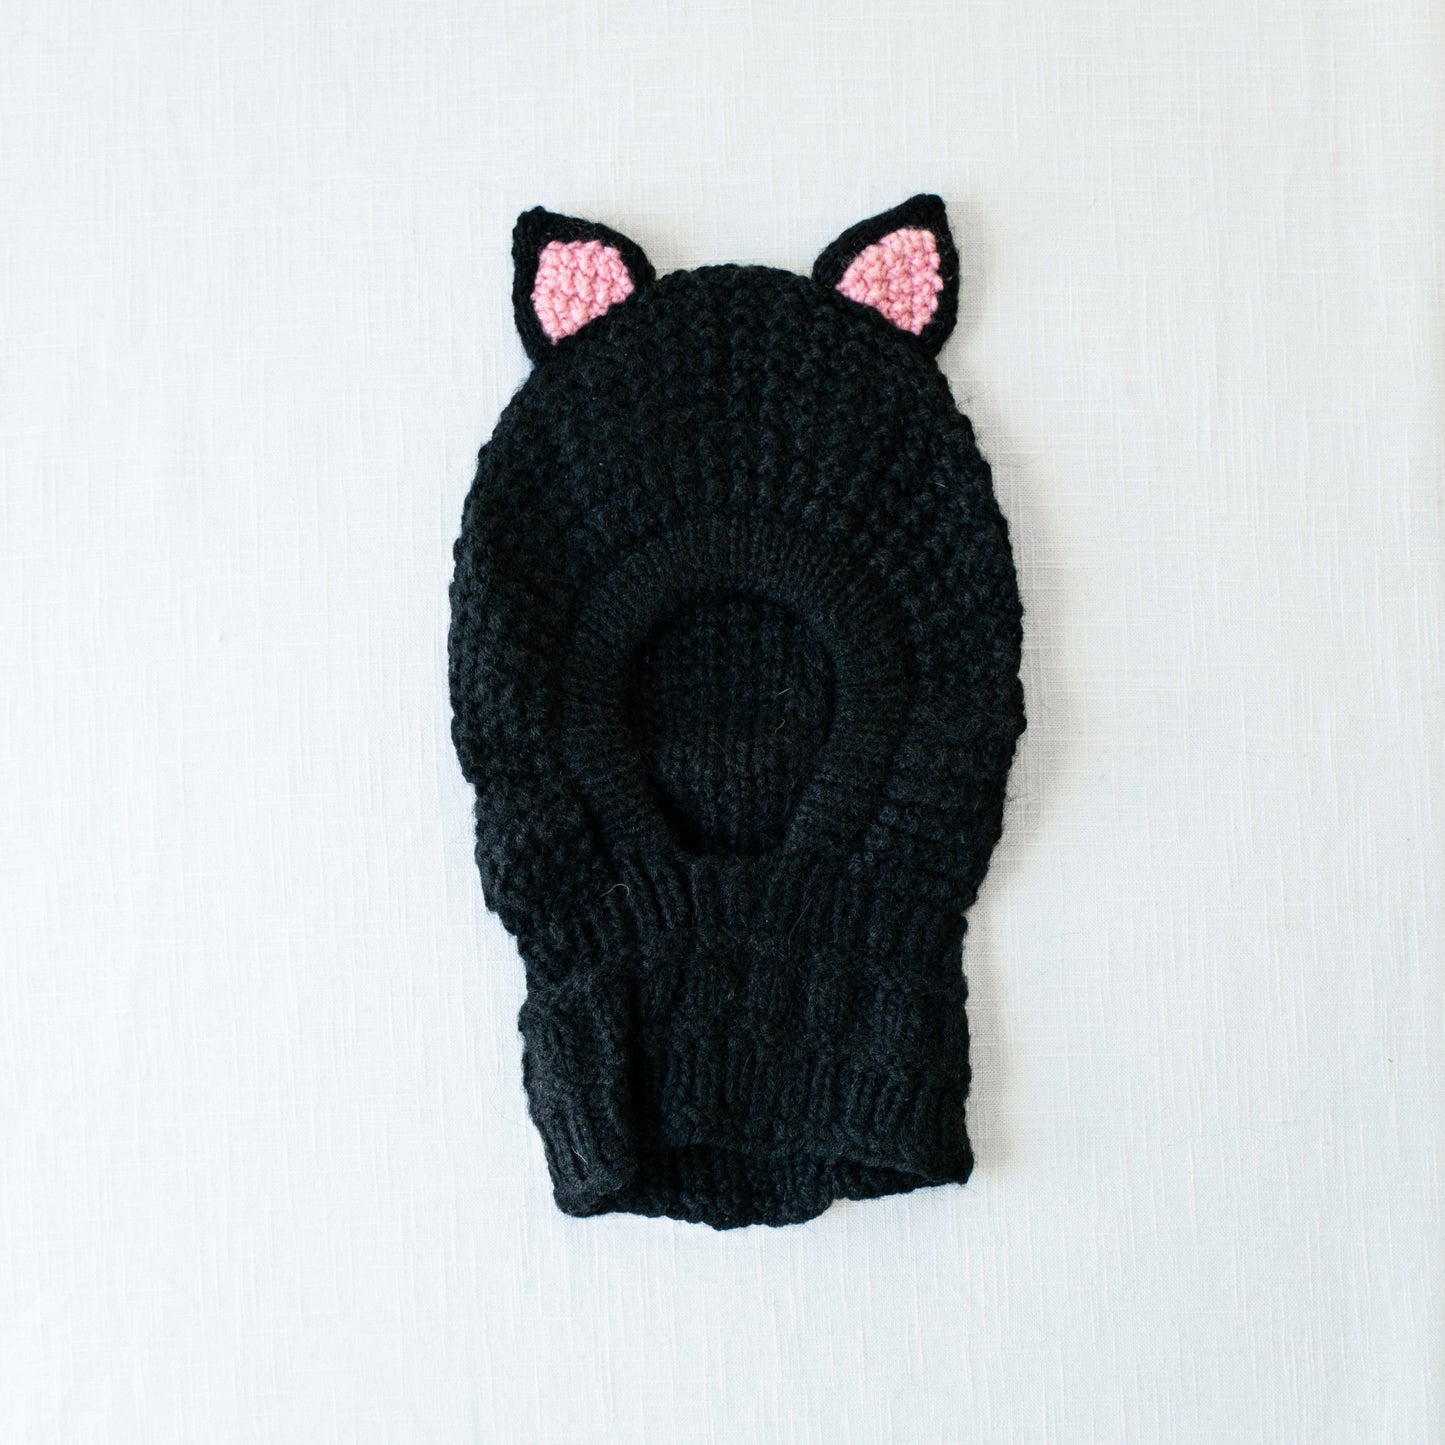 Cat animal hood or hat by andes gifts